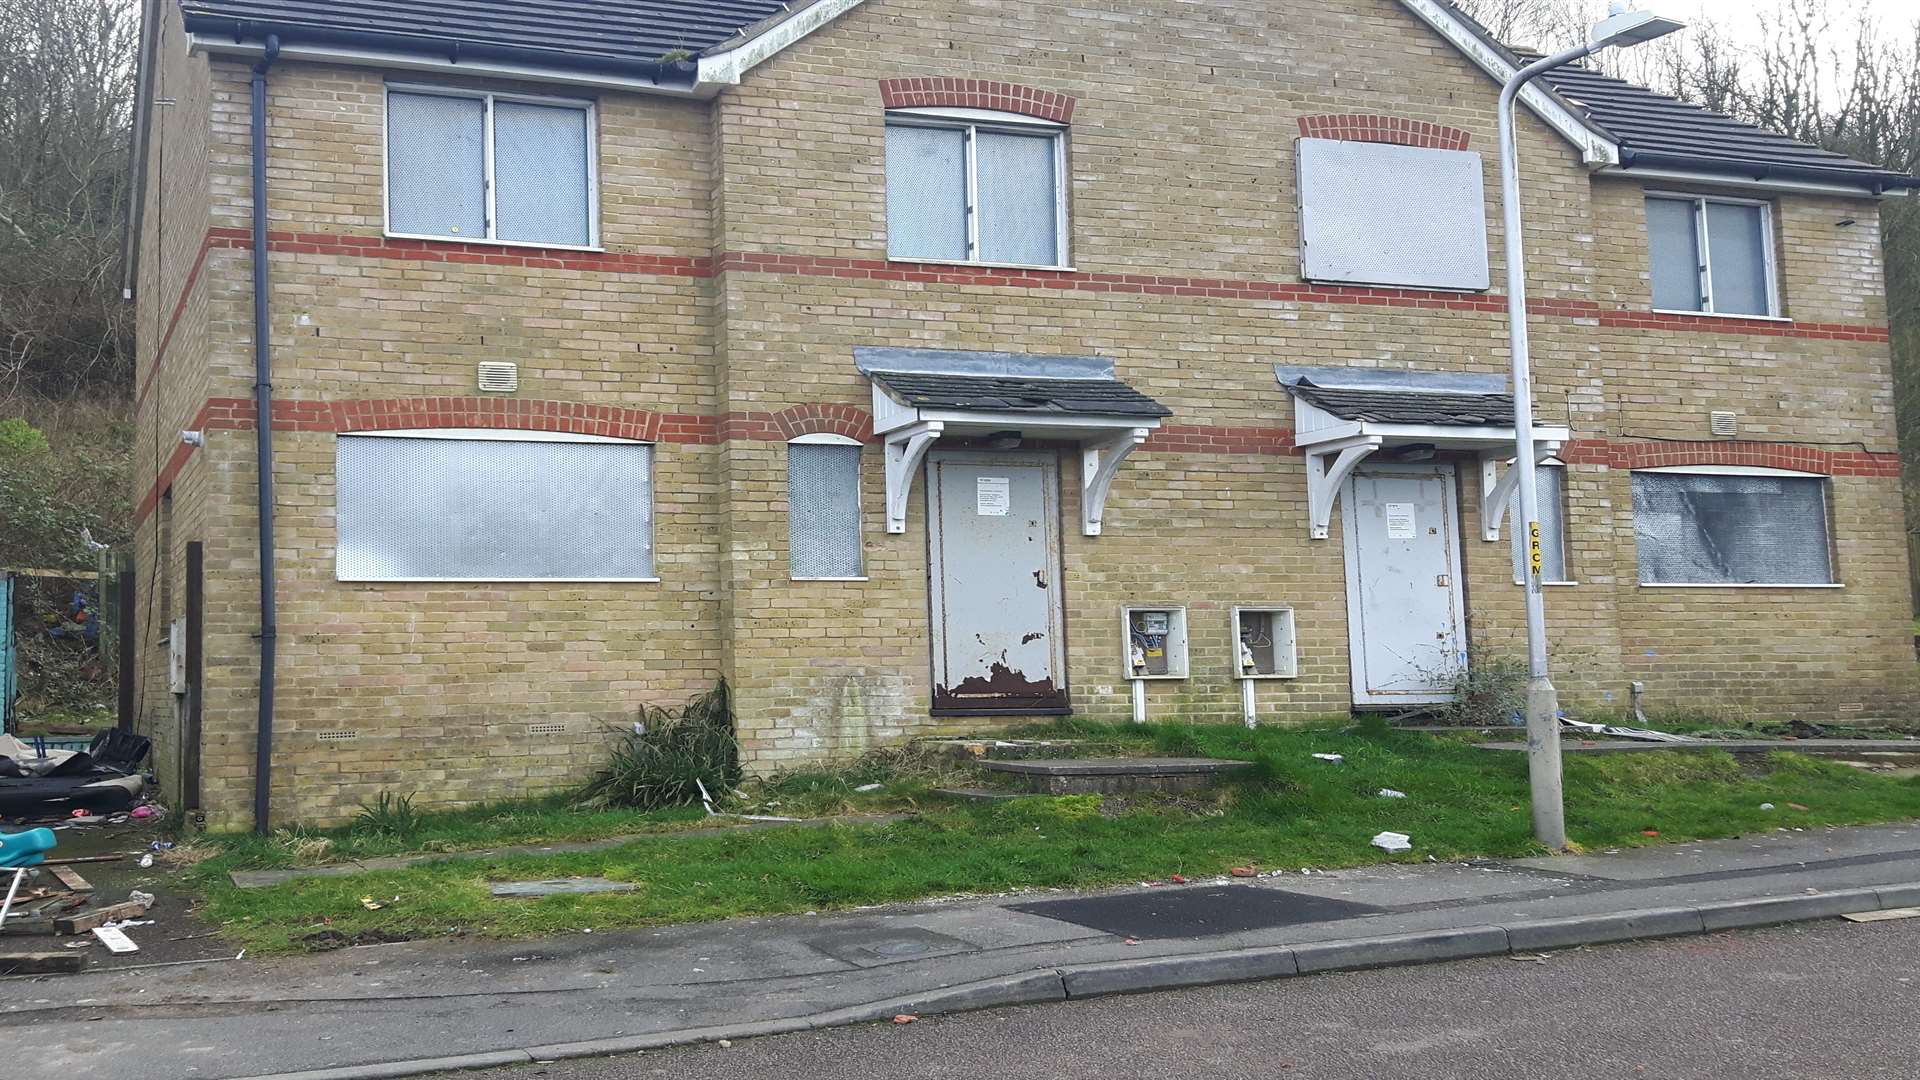 The derelict homes in Randolph Road will be developed as part of the dementia village